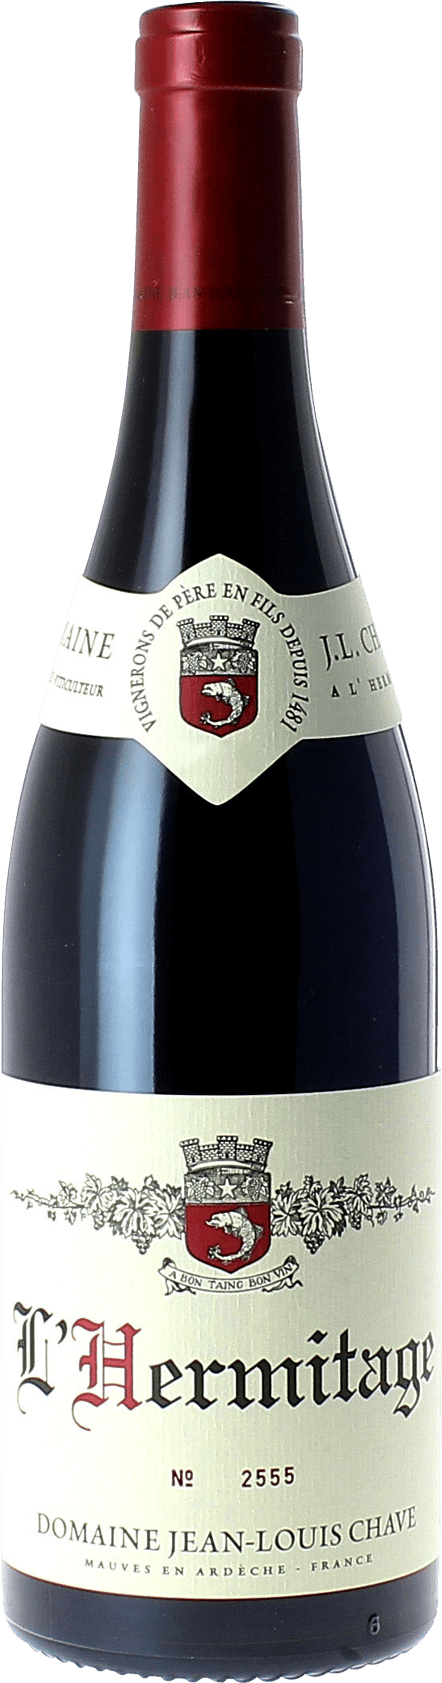 Hermitage rouge jean-louis chave 2016  Hermitage, Valle du Rhne Rouge